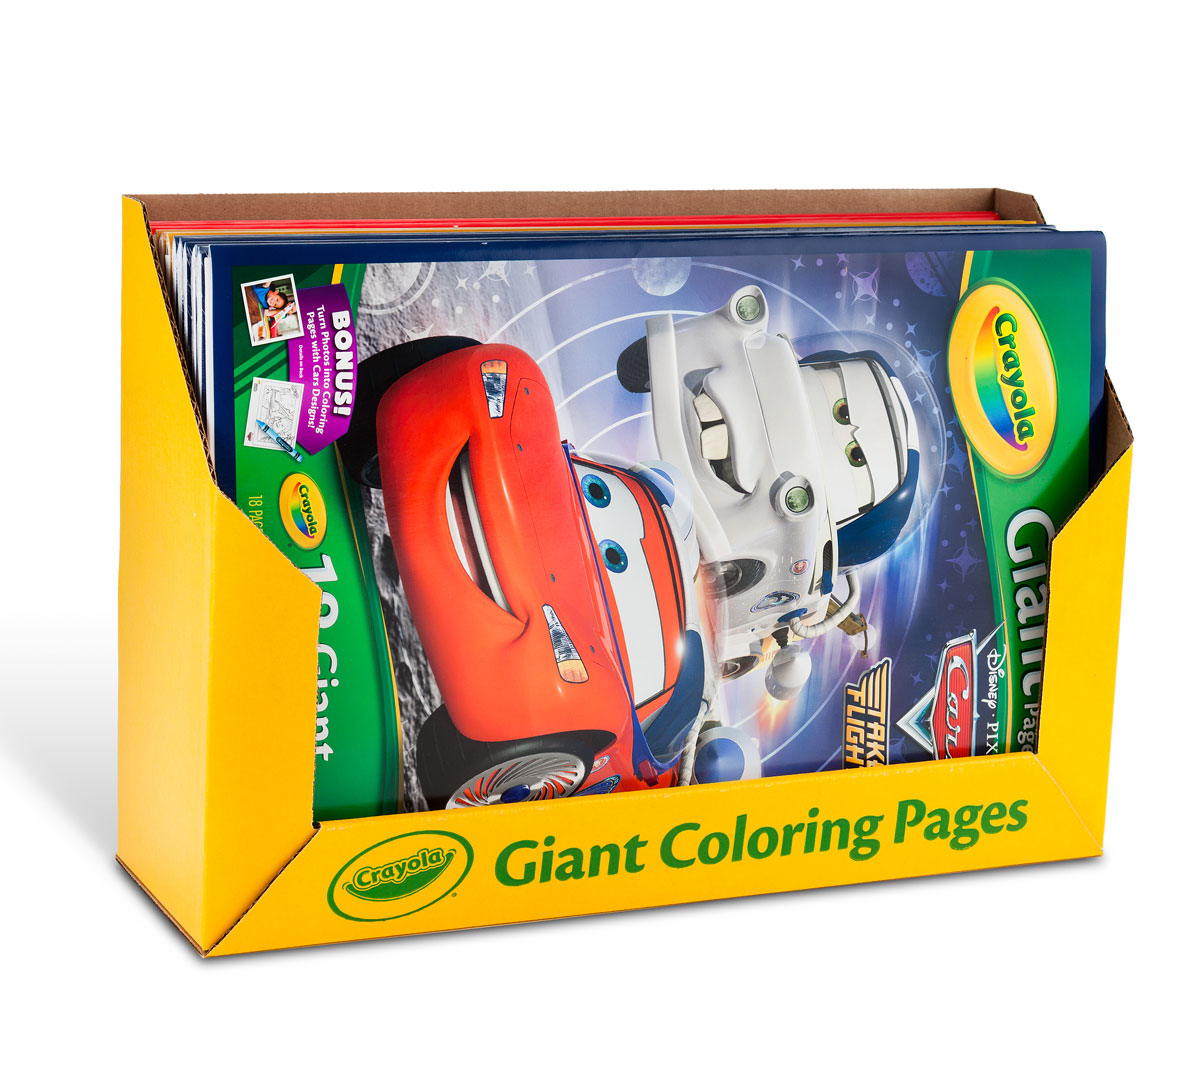 Giant Crayola Coloring Books Crayola long colored pencil set brand new